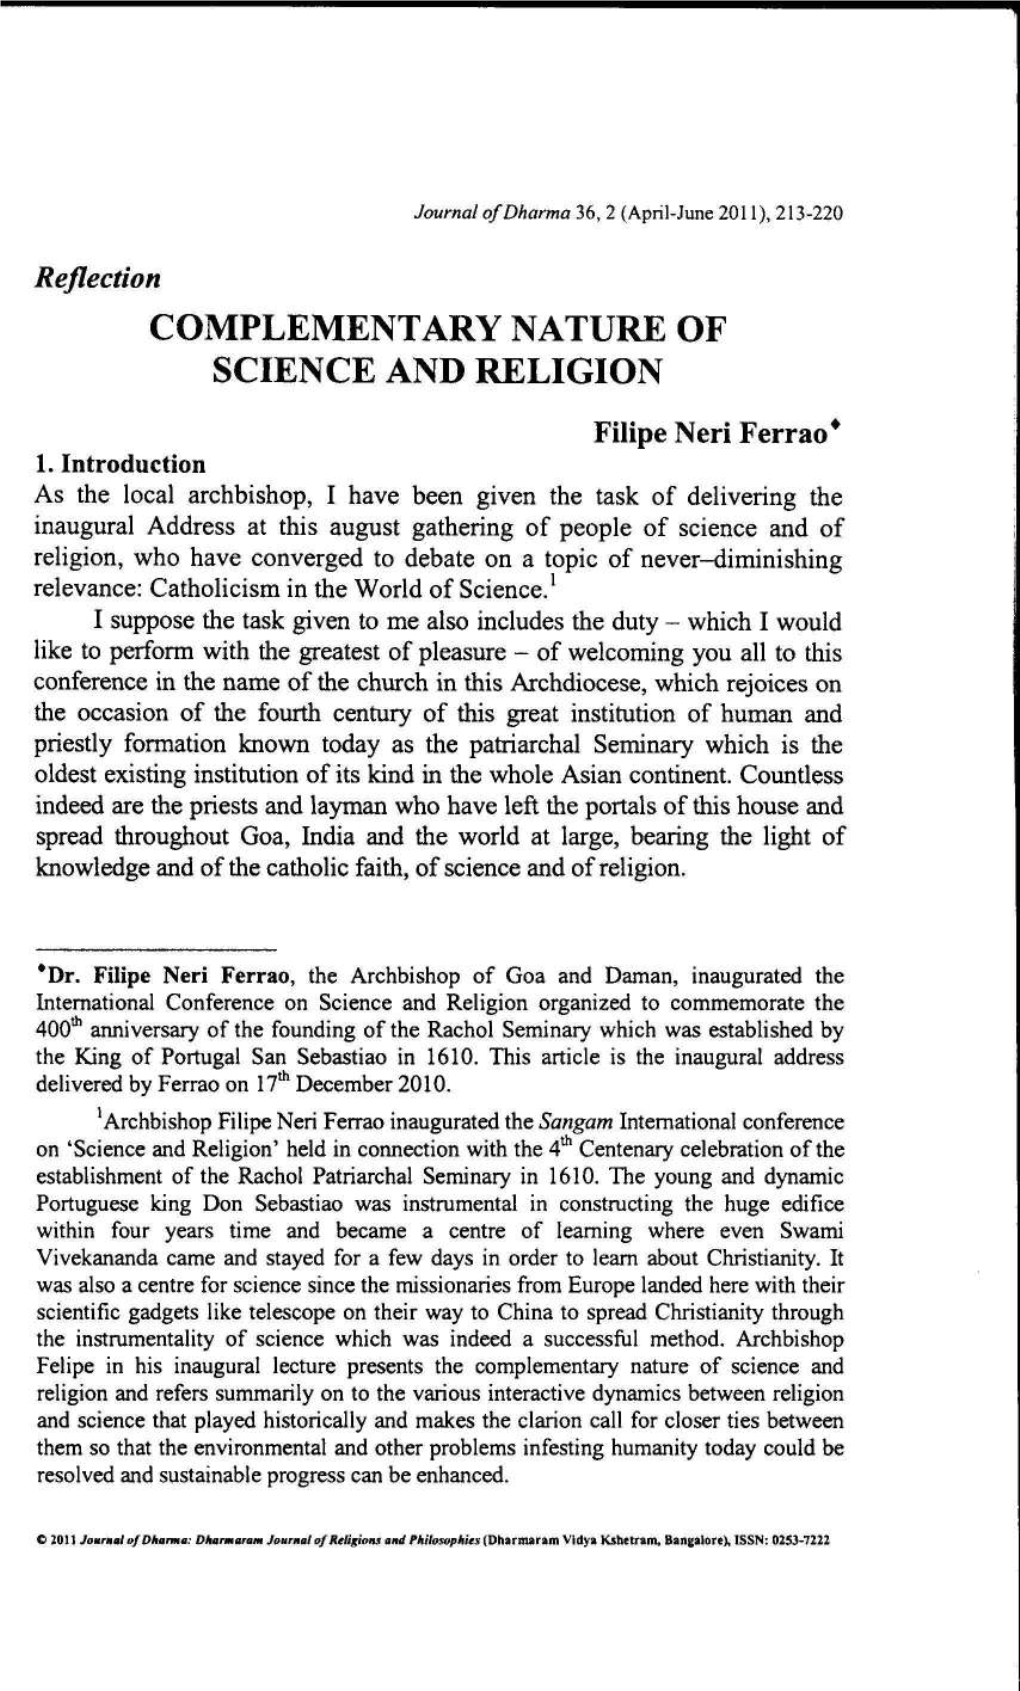 Complementary Nature of Science and Religion